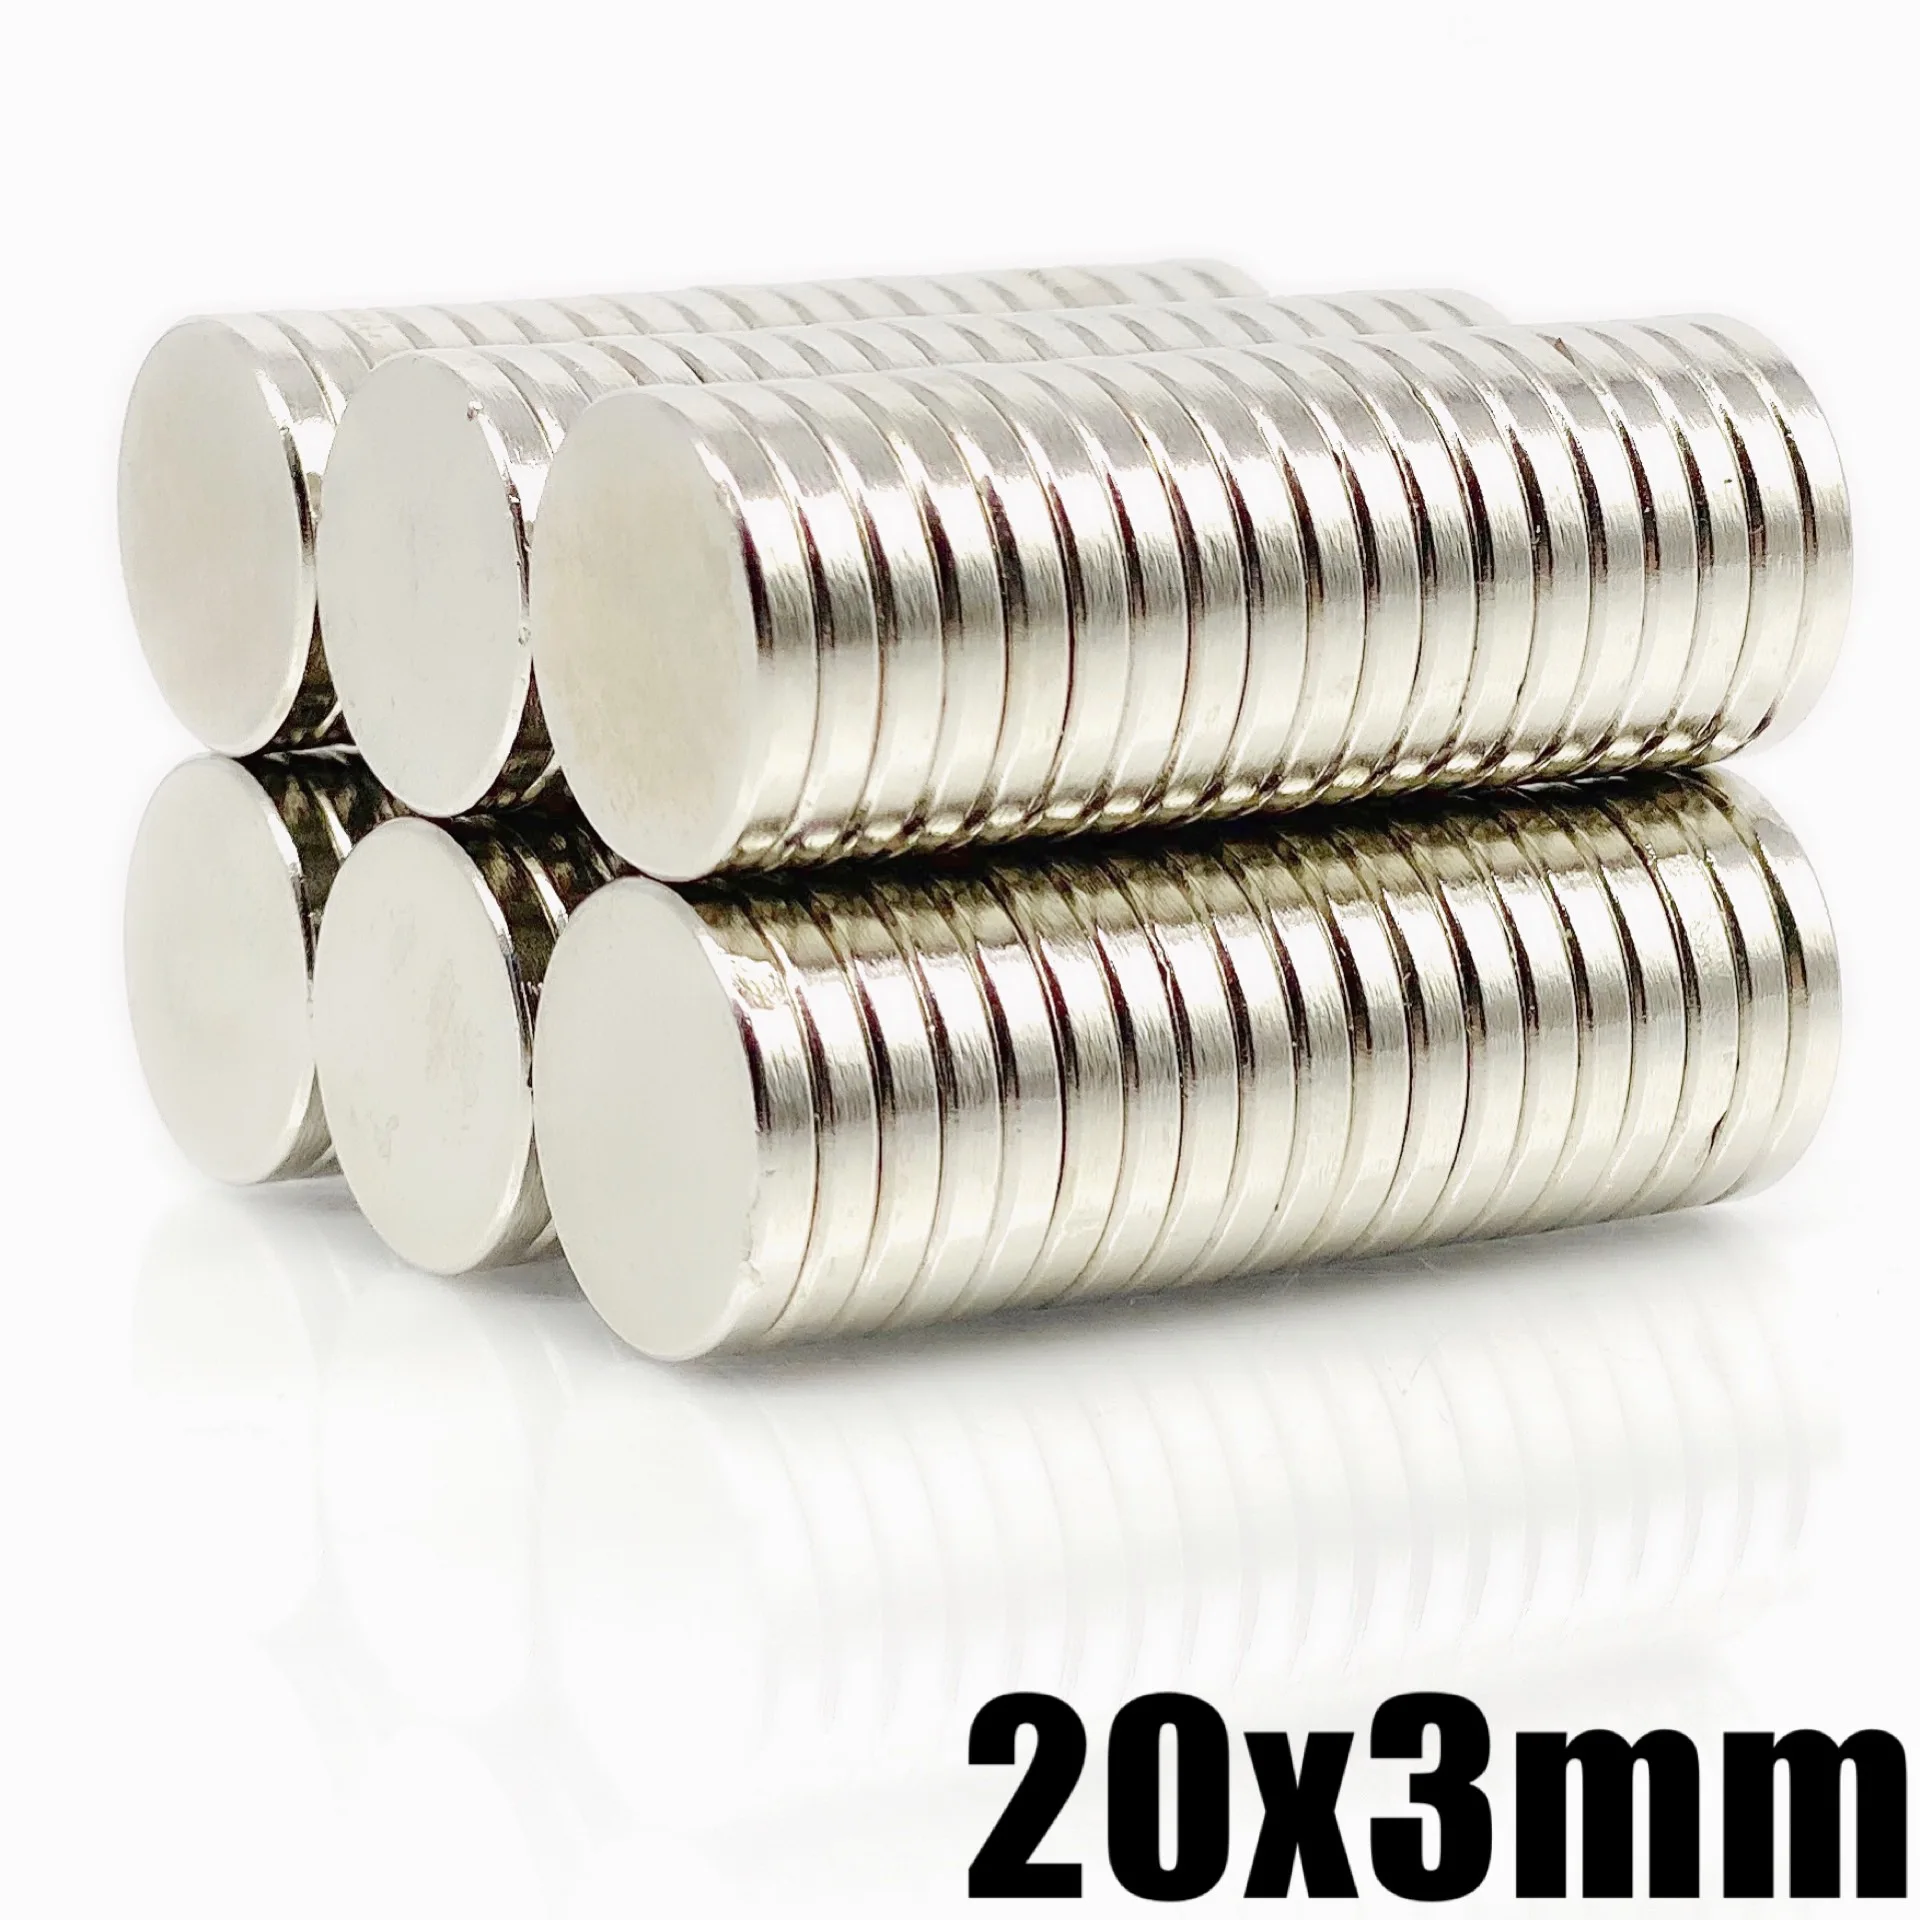 Magnets 20x3 mm Neodymium Disc very strong large round magnet 20mm dia x 3mm 